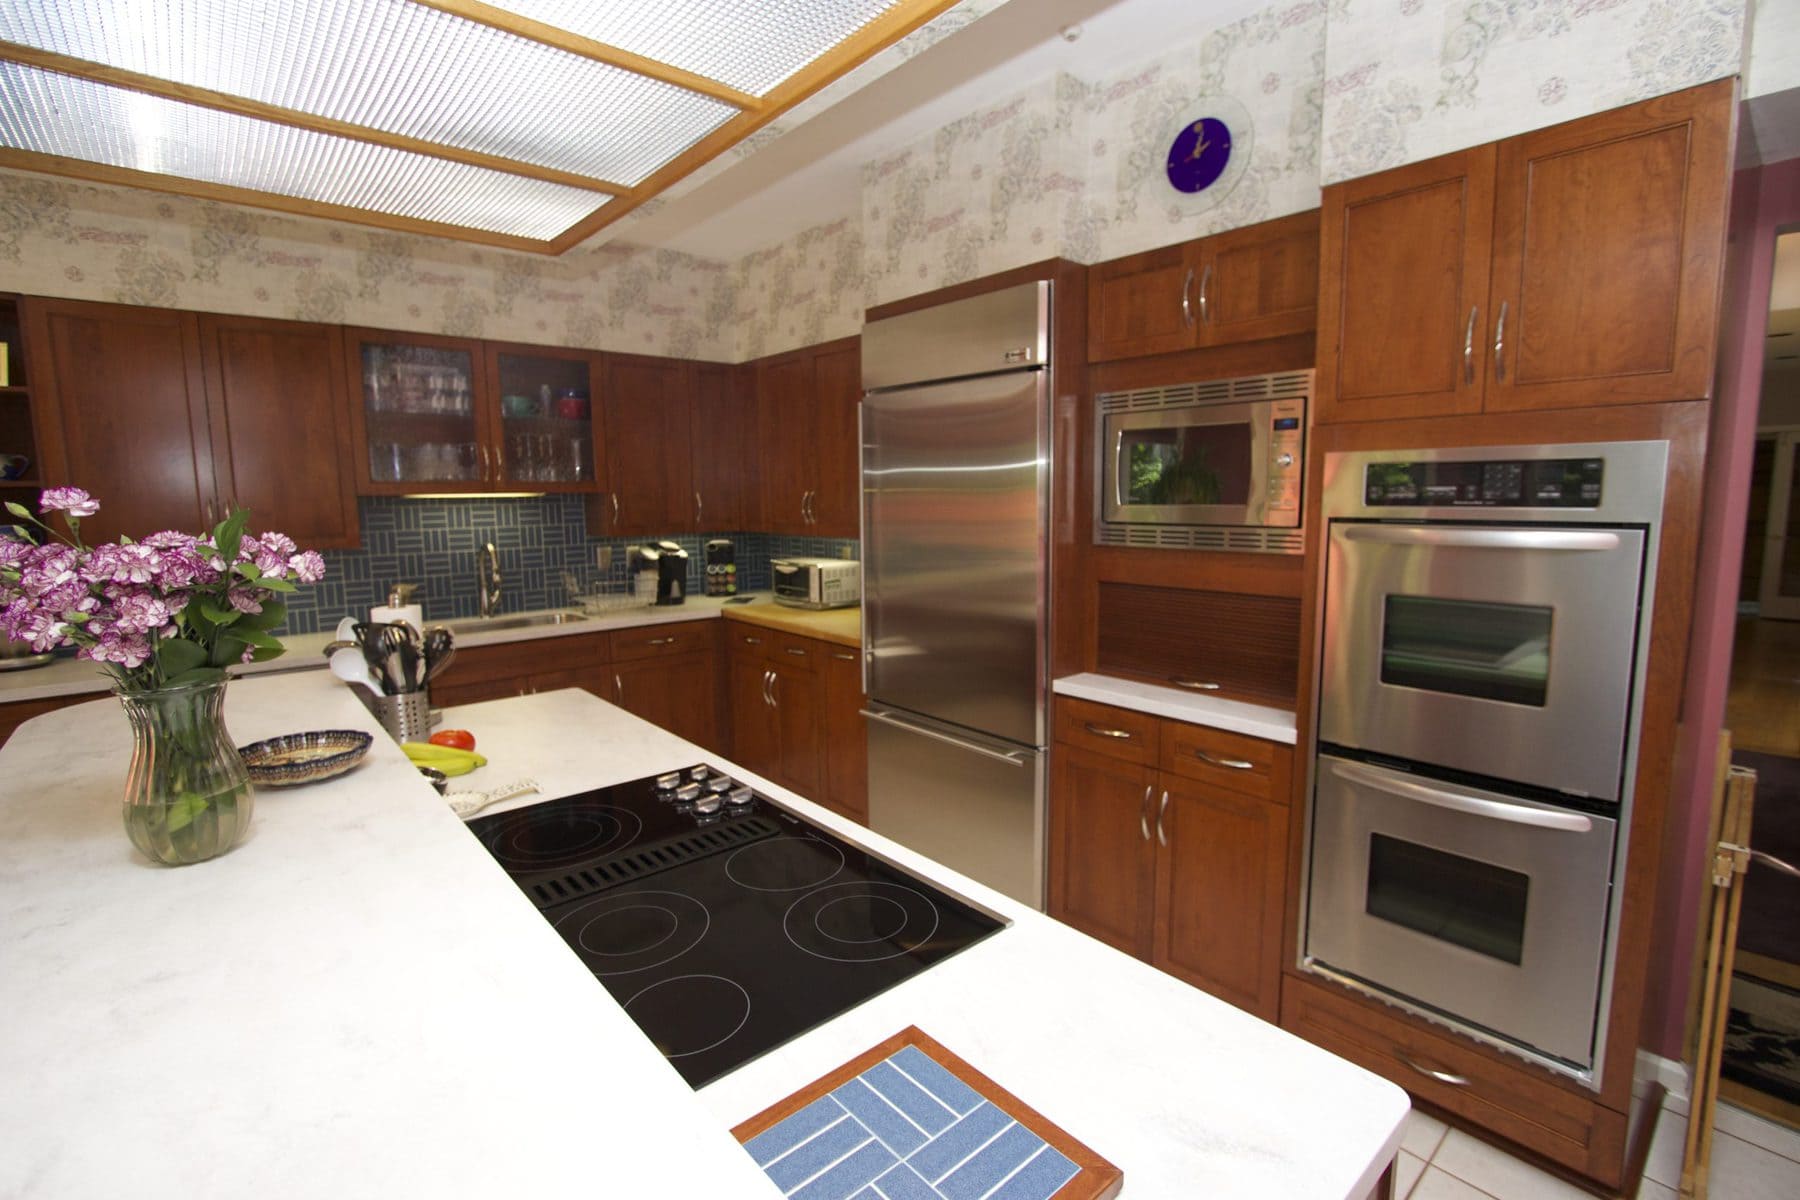 Where To Put Things In Kitchen Cabinets? - PA Kitchen